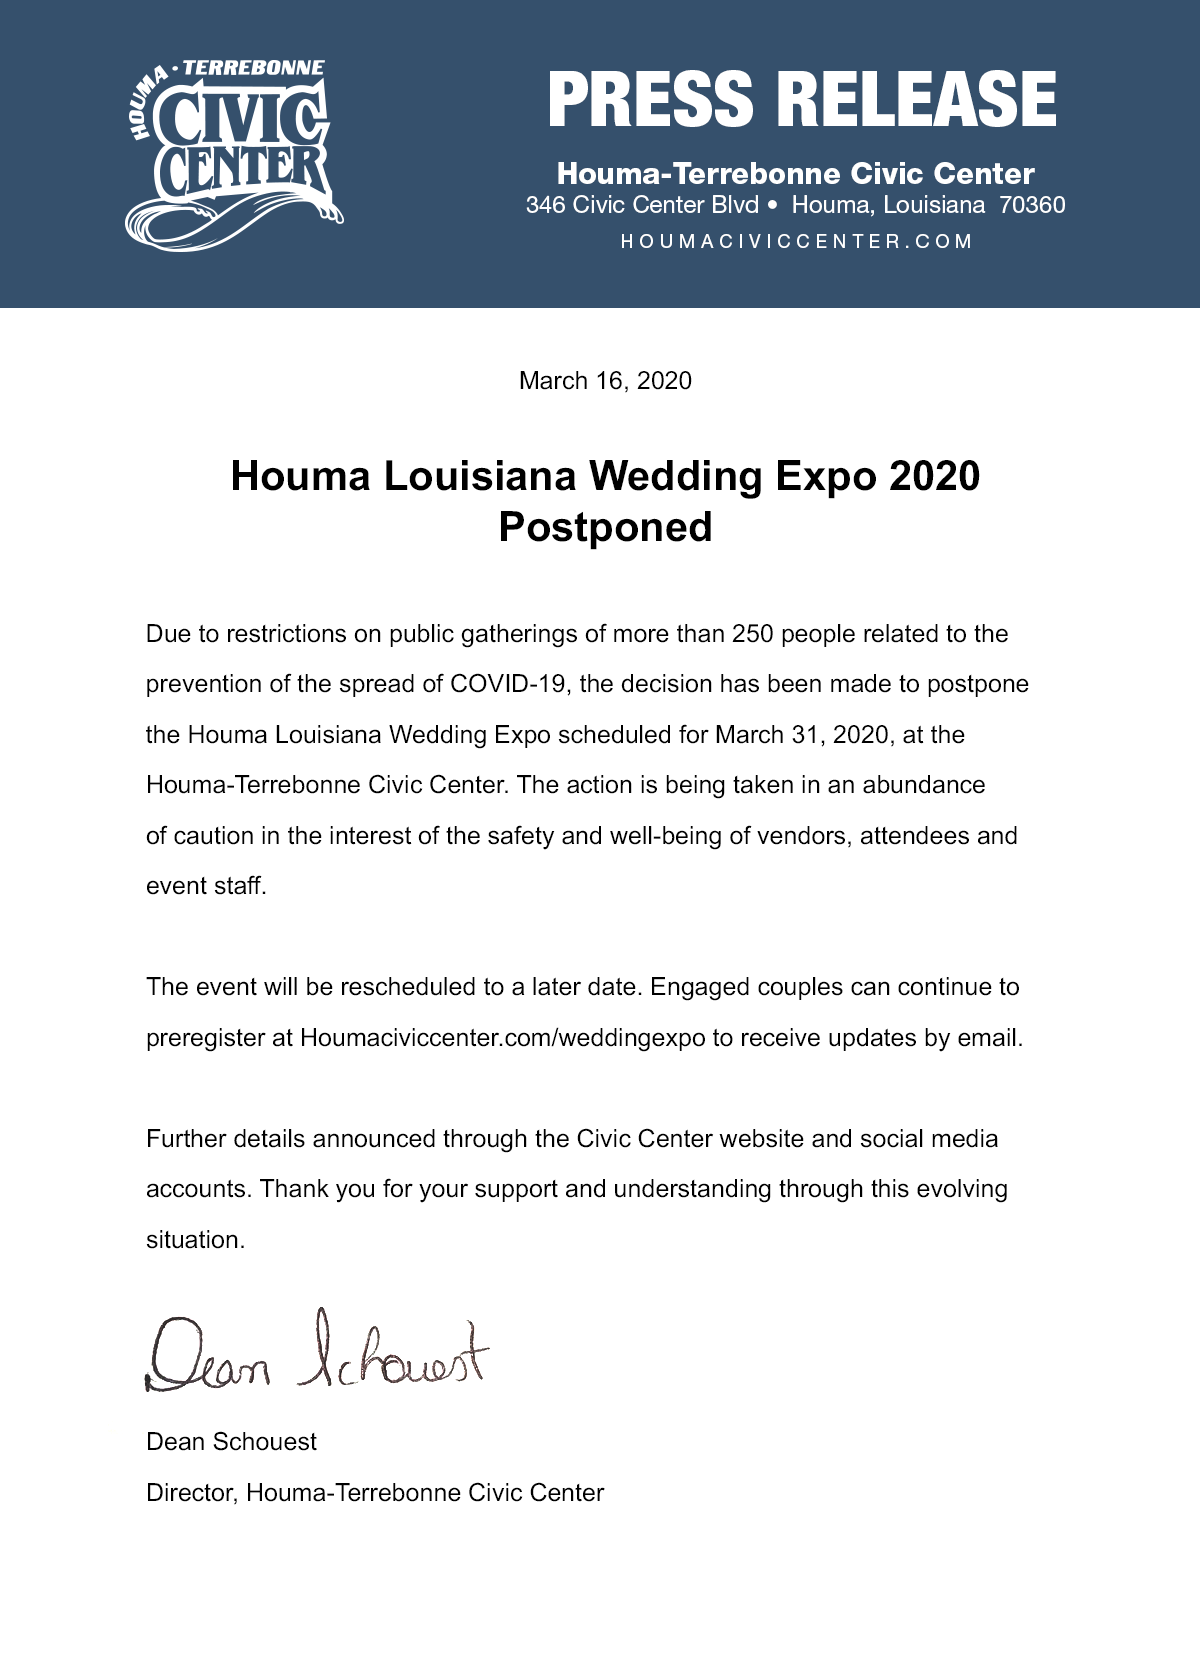 March 16, 2020 Houma Louisiana Wedding Expo 2020 Postponed Due to restrictions on public gatherings of more than 250 people related to the prevention of the spread of COVID-19, the decision has been made to postpone the Houma Louisiana Wedding Expo scheduled for March 31, 2020, at the Houma-Terrebonne Civic Center. The action is being taken in an abundance of caution in the interest of the safety and well-being of vendors, attendees and event staff. The event will be rescheduled to a later date. Engaged couples can continue to preregister at Houmaciviccenter.com/weddingexpo to receive updates by email. Further details announced through the Civic Center website and social media accounts. Thank you for your support and understanding through this evolving situation. Dean Schouest Director, Houma-Terrebonne Civic Center